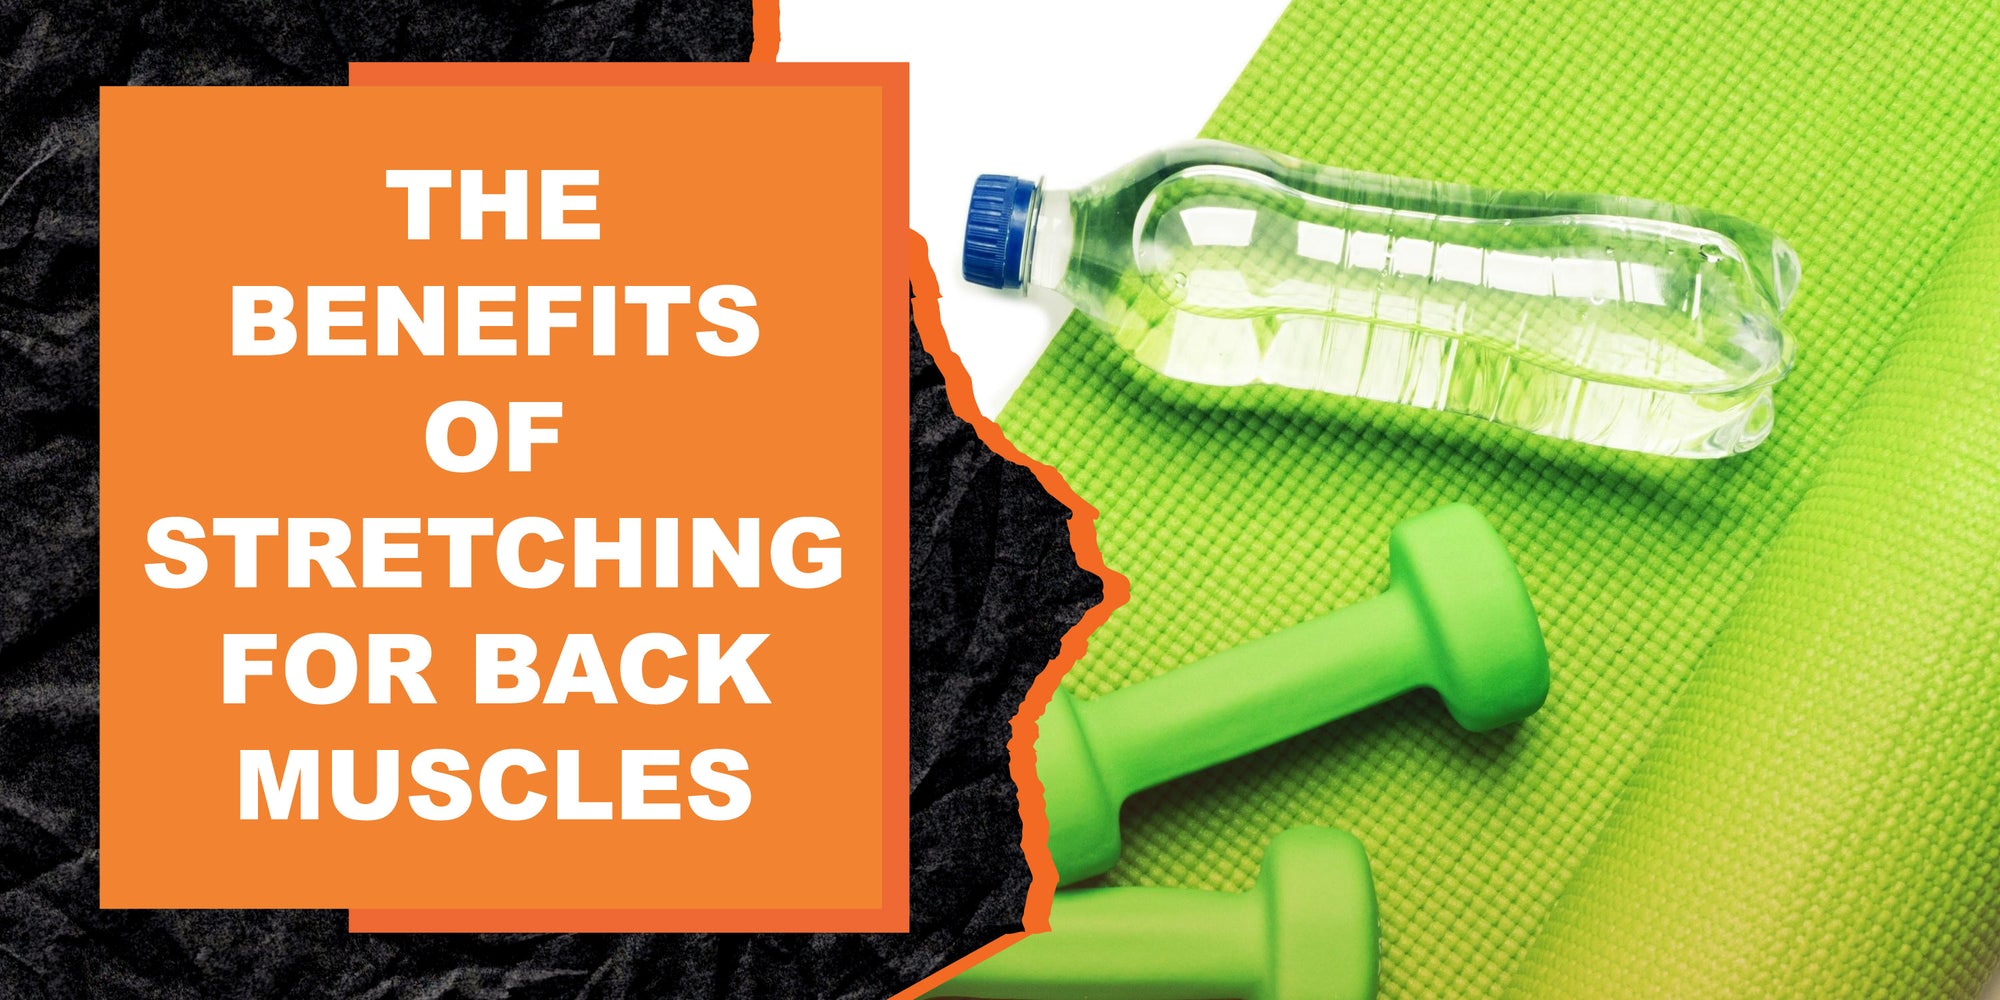 The Benefits of Stretching for Back Muscles